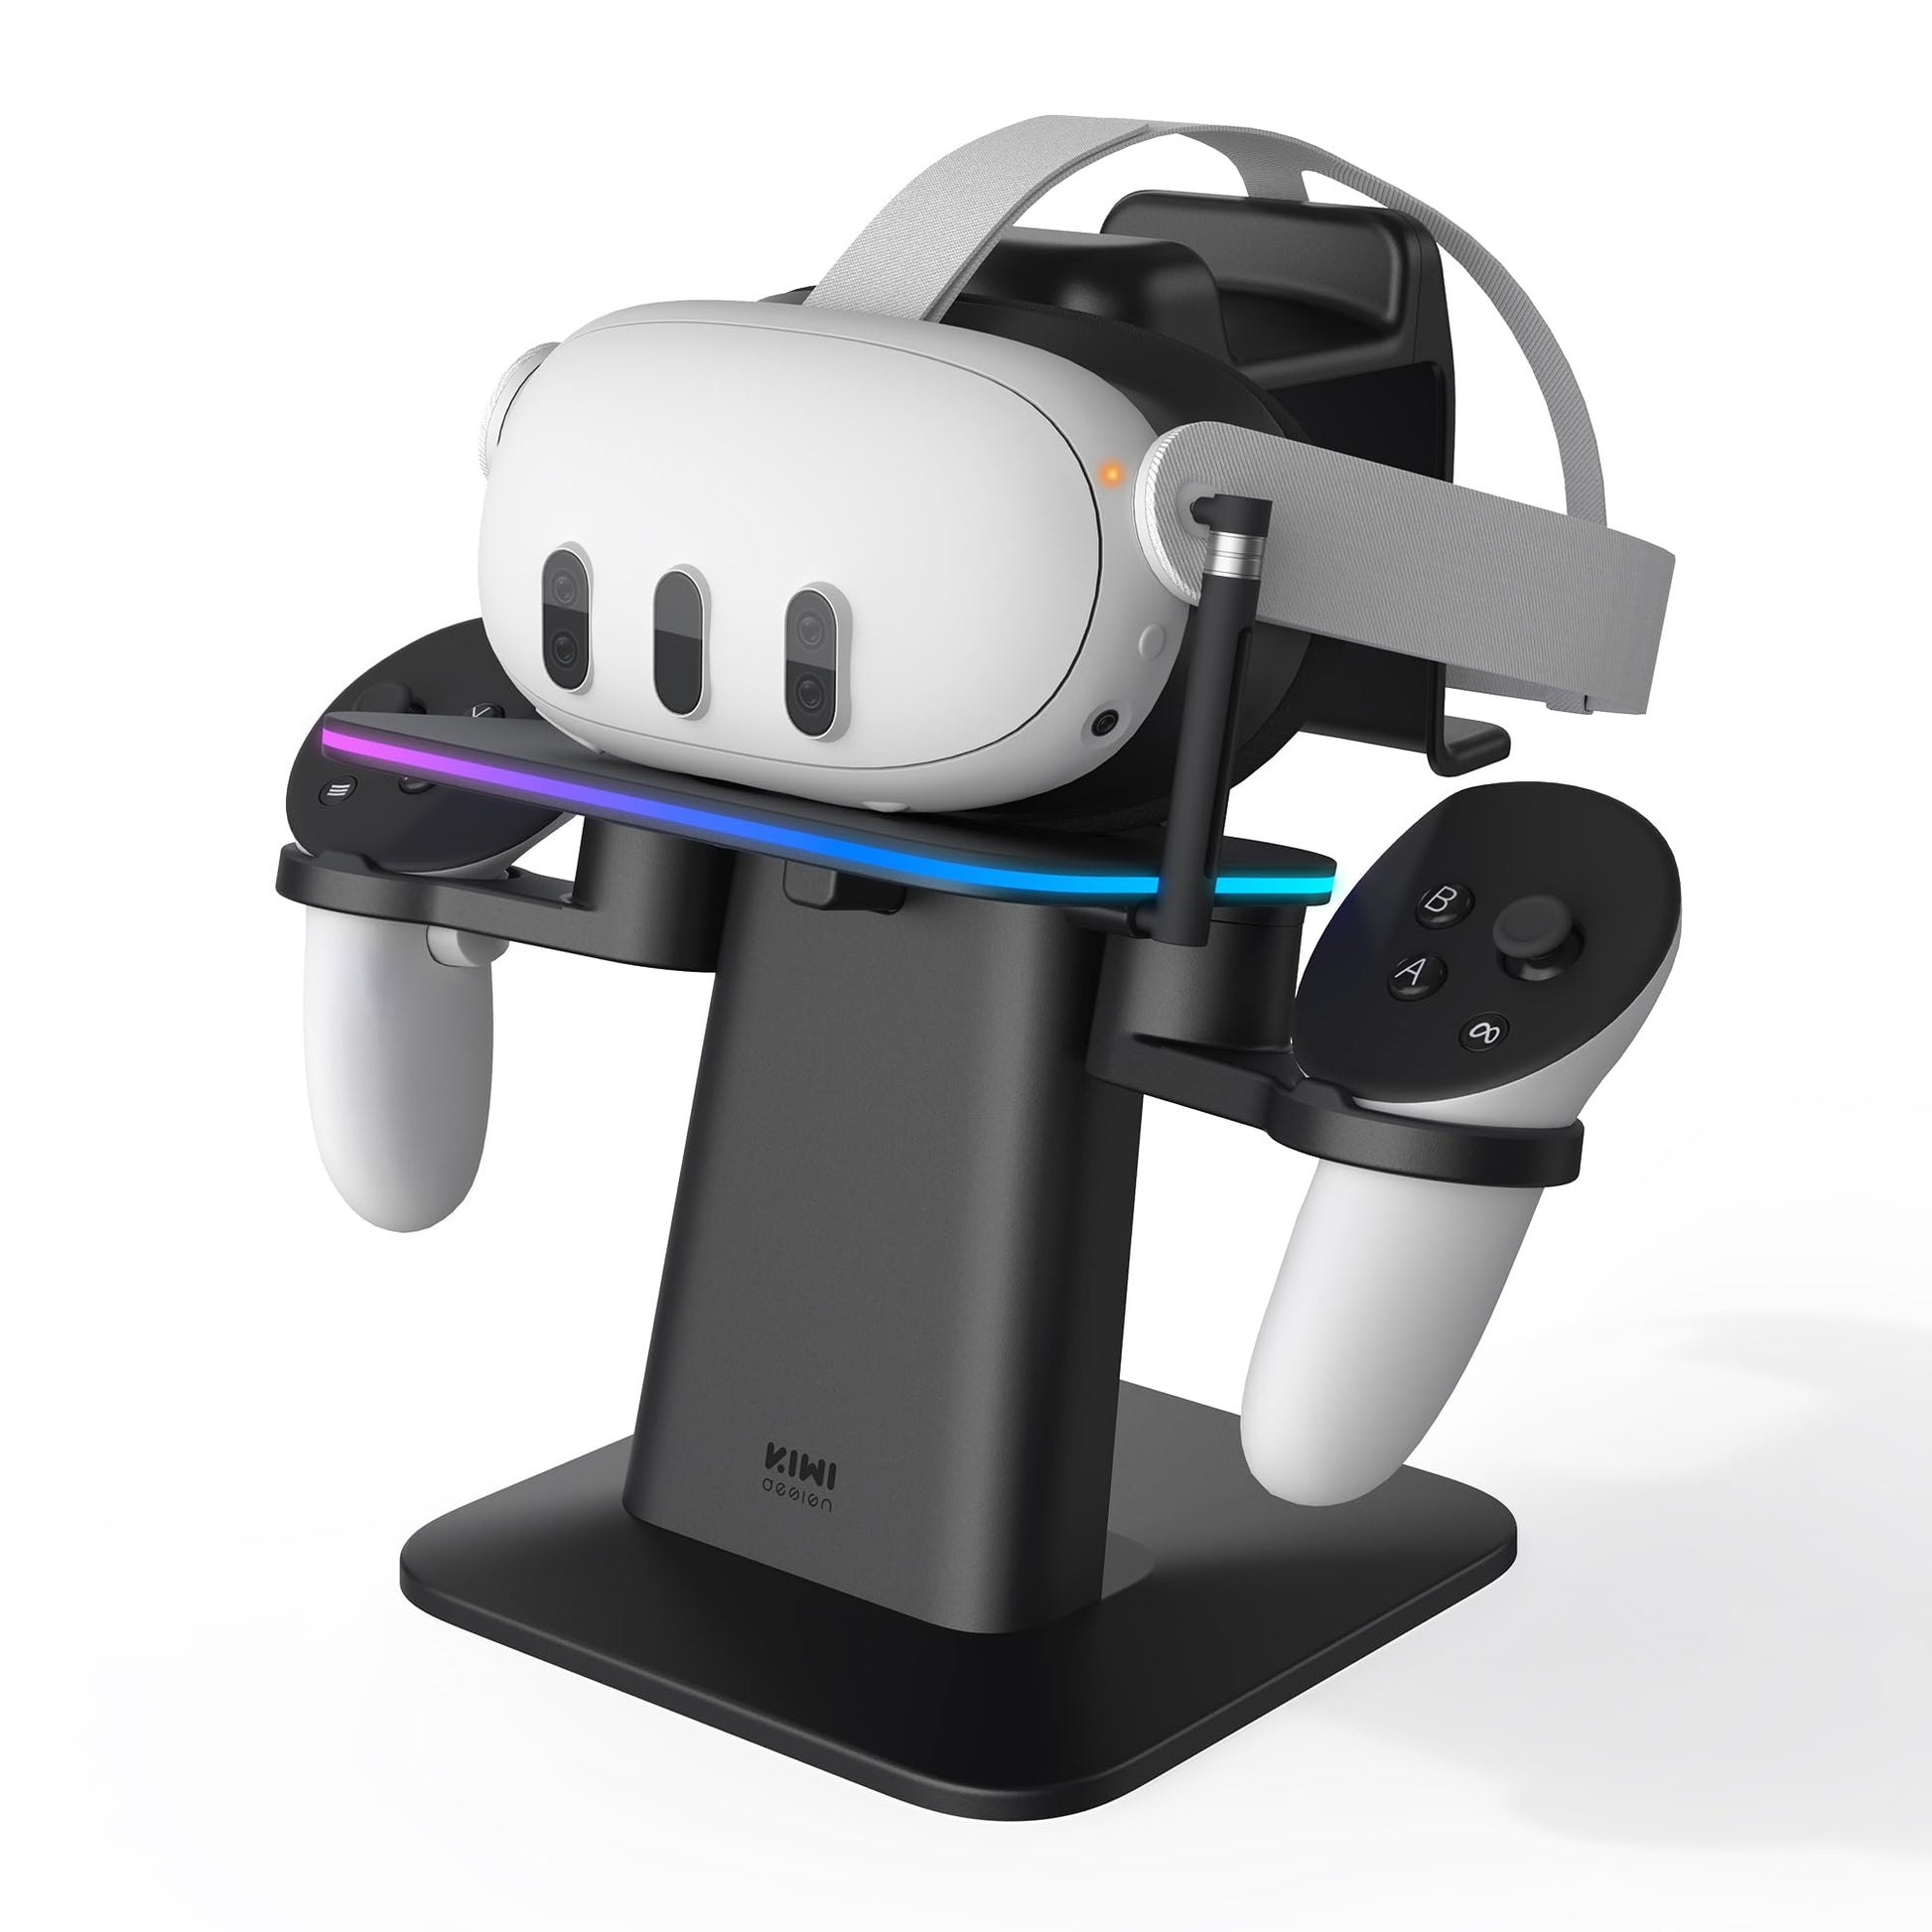 KIWI design Charging Dock for Meta Oculus Quest 3/Quest 2/Quest Pro Accessories, Meta Officially Co-Branded, RGB Vertical Charging Stand and Controller Holder - ARVRedtech.com | AR & VR Education Technology